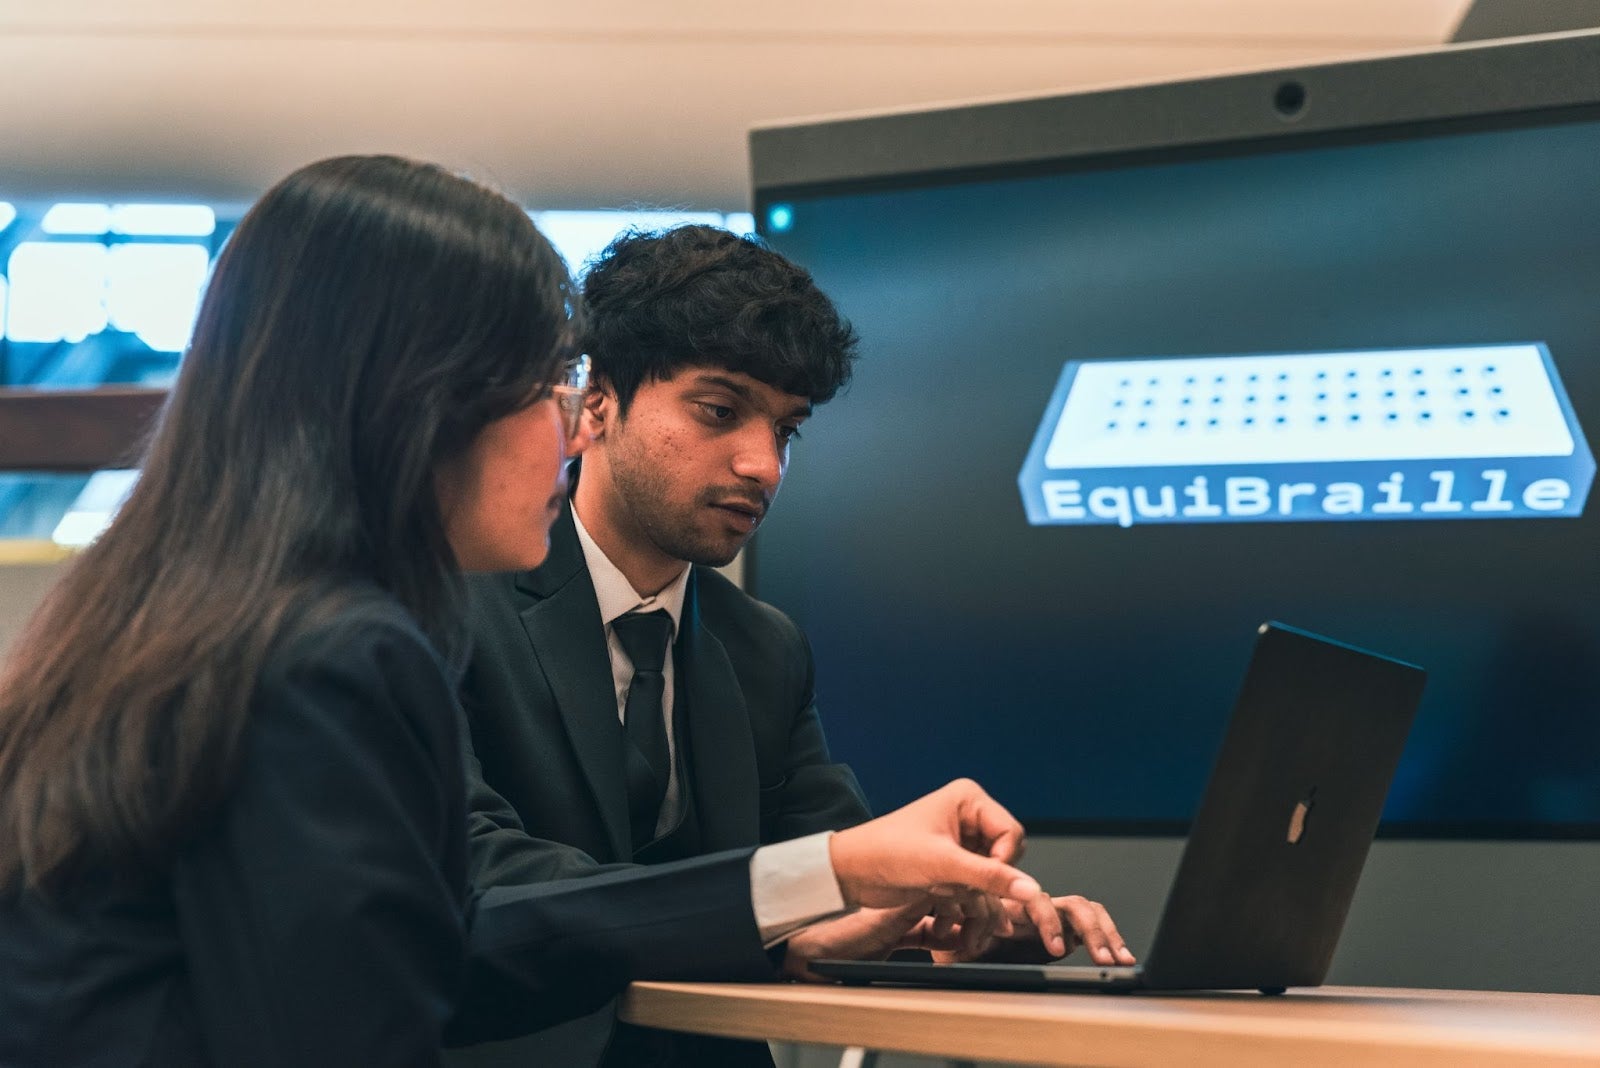 Two students work on a laptop while a screen behind them displays the text "EquiBraille" on a 3D render of the product.